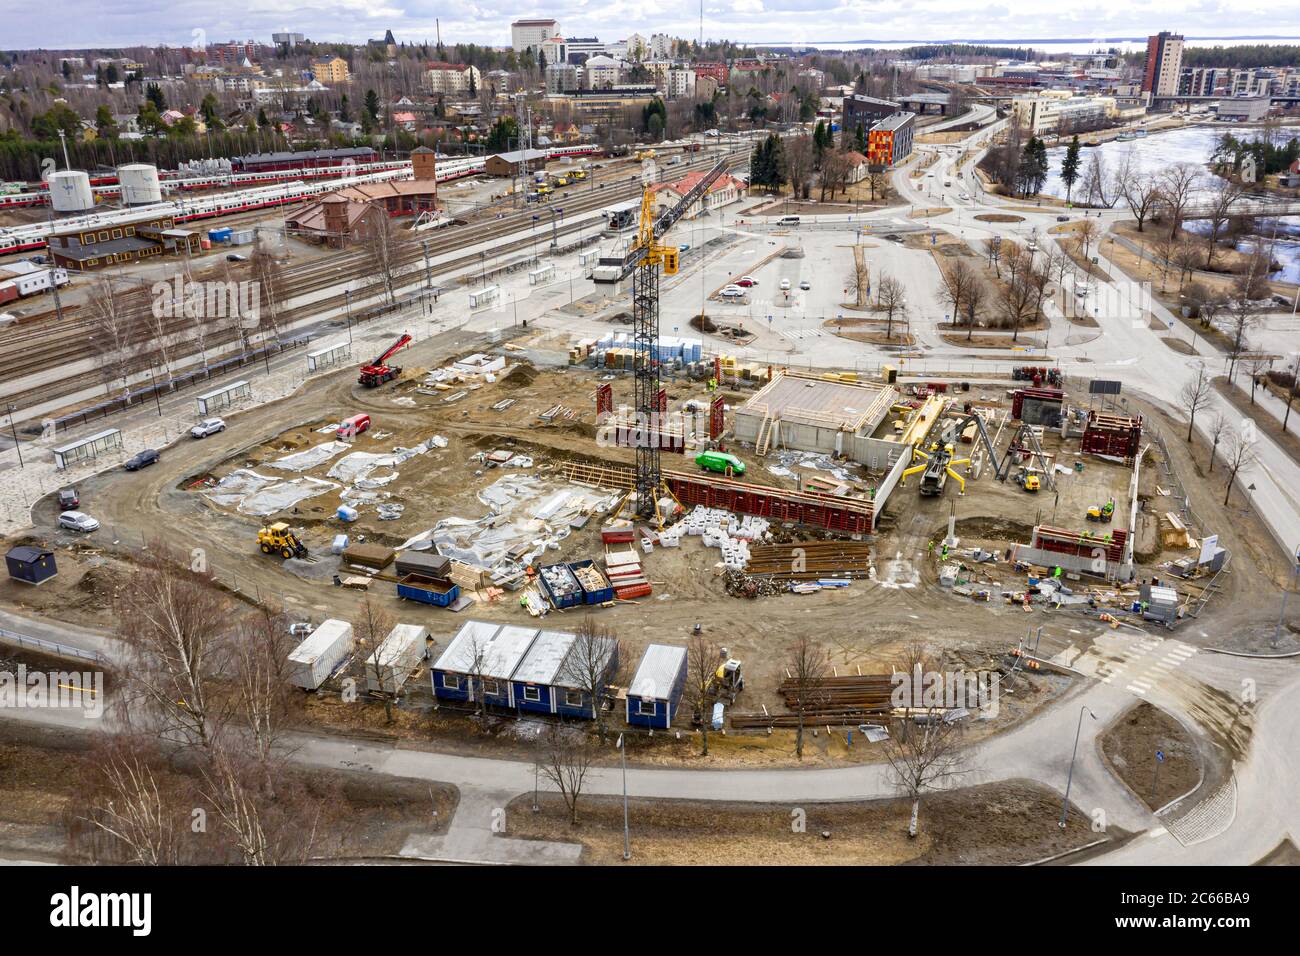 Joensuu, Finland - April 15, 2020: Aerial view of building construction site for the multi-level parking garage in railway station. Stock Photo